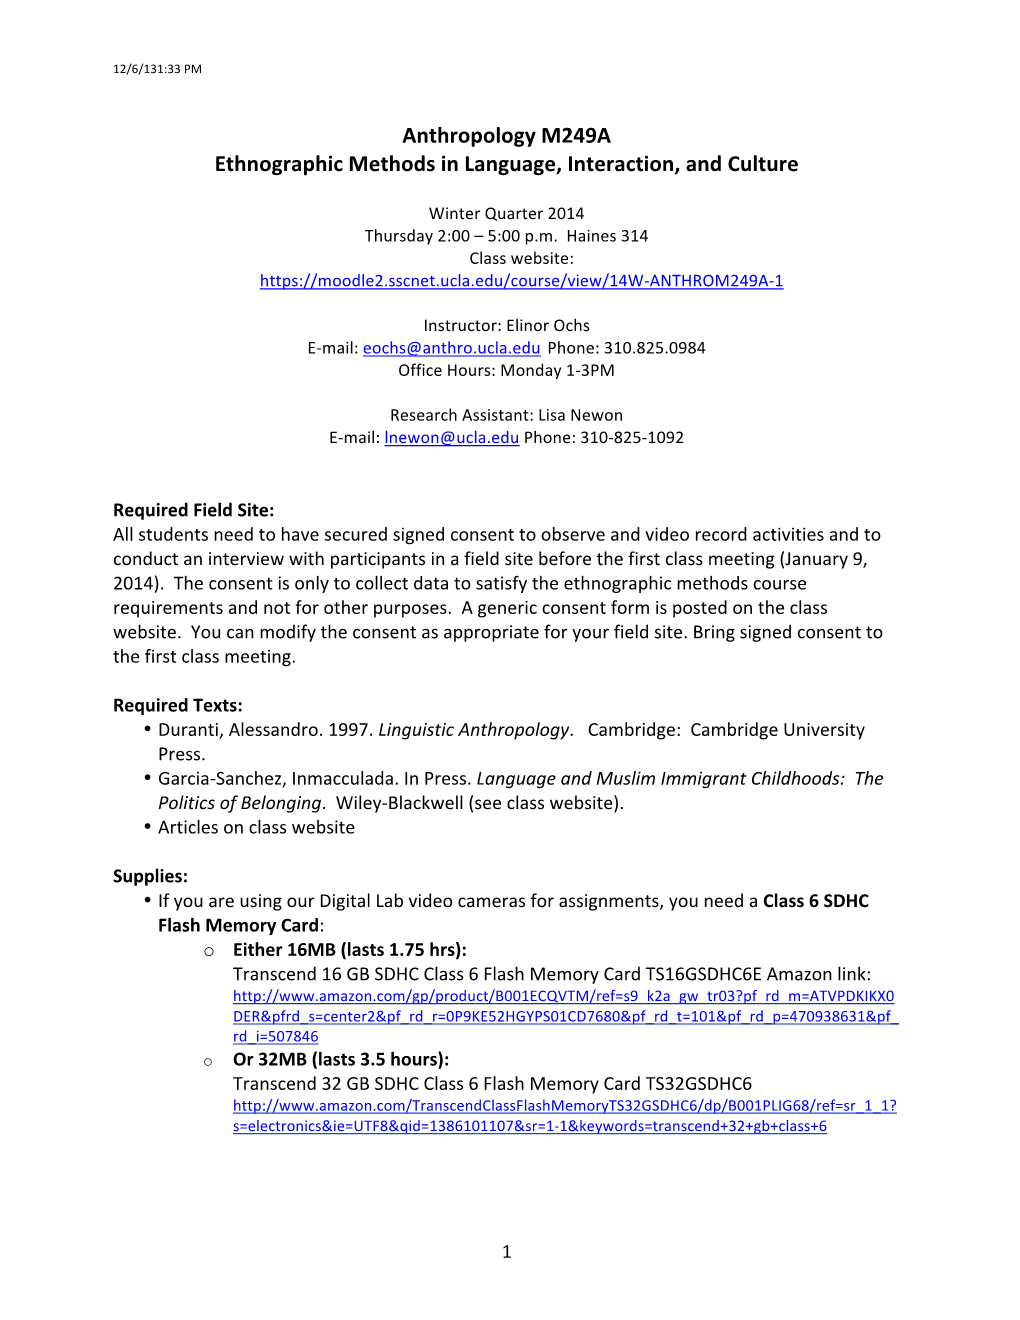 Anthro M249A: Ethnographic Methods in Language, Interaction, and Culture